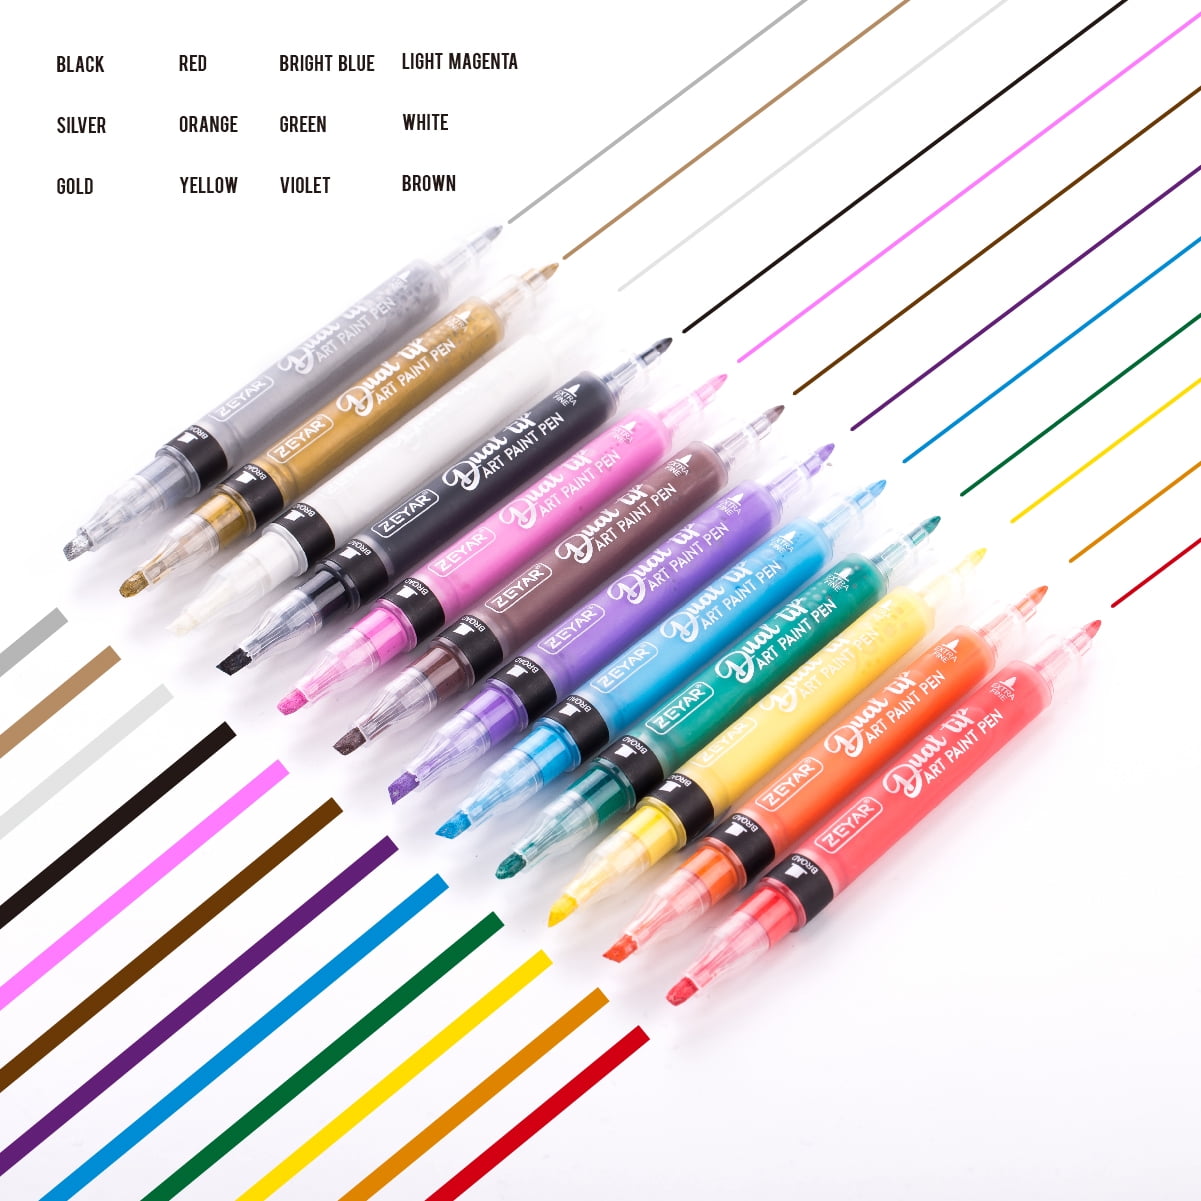 ZEYAR Dual Tip Acrylic Paint Pen 12 Colors, Board and Extra Fine Tips ...